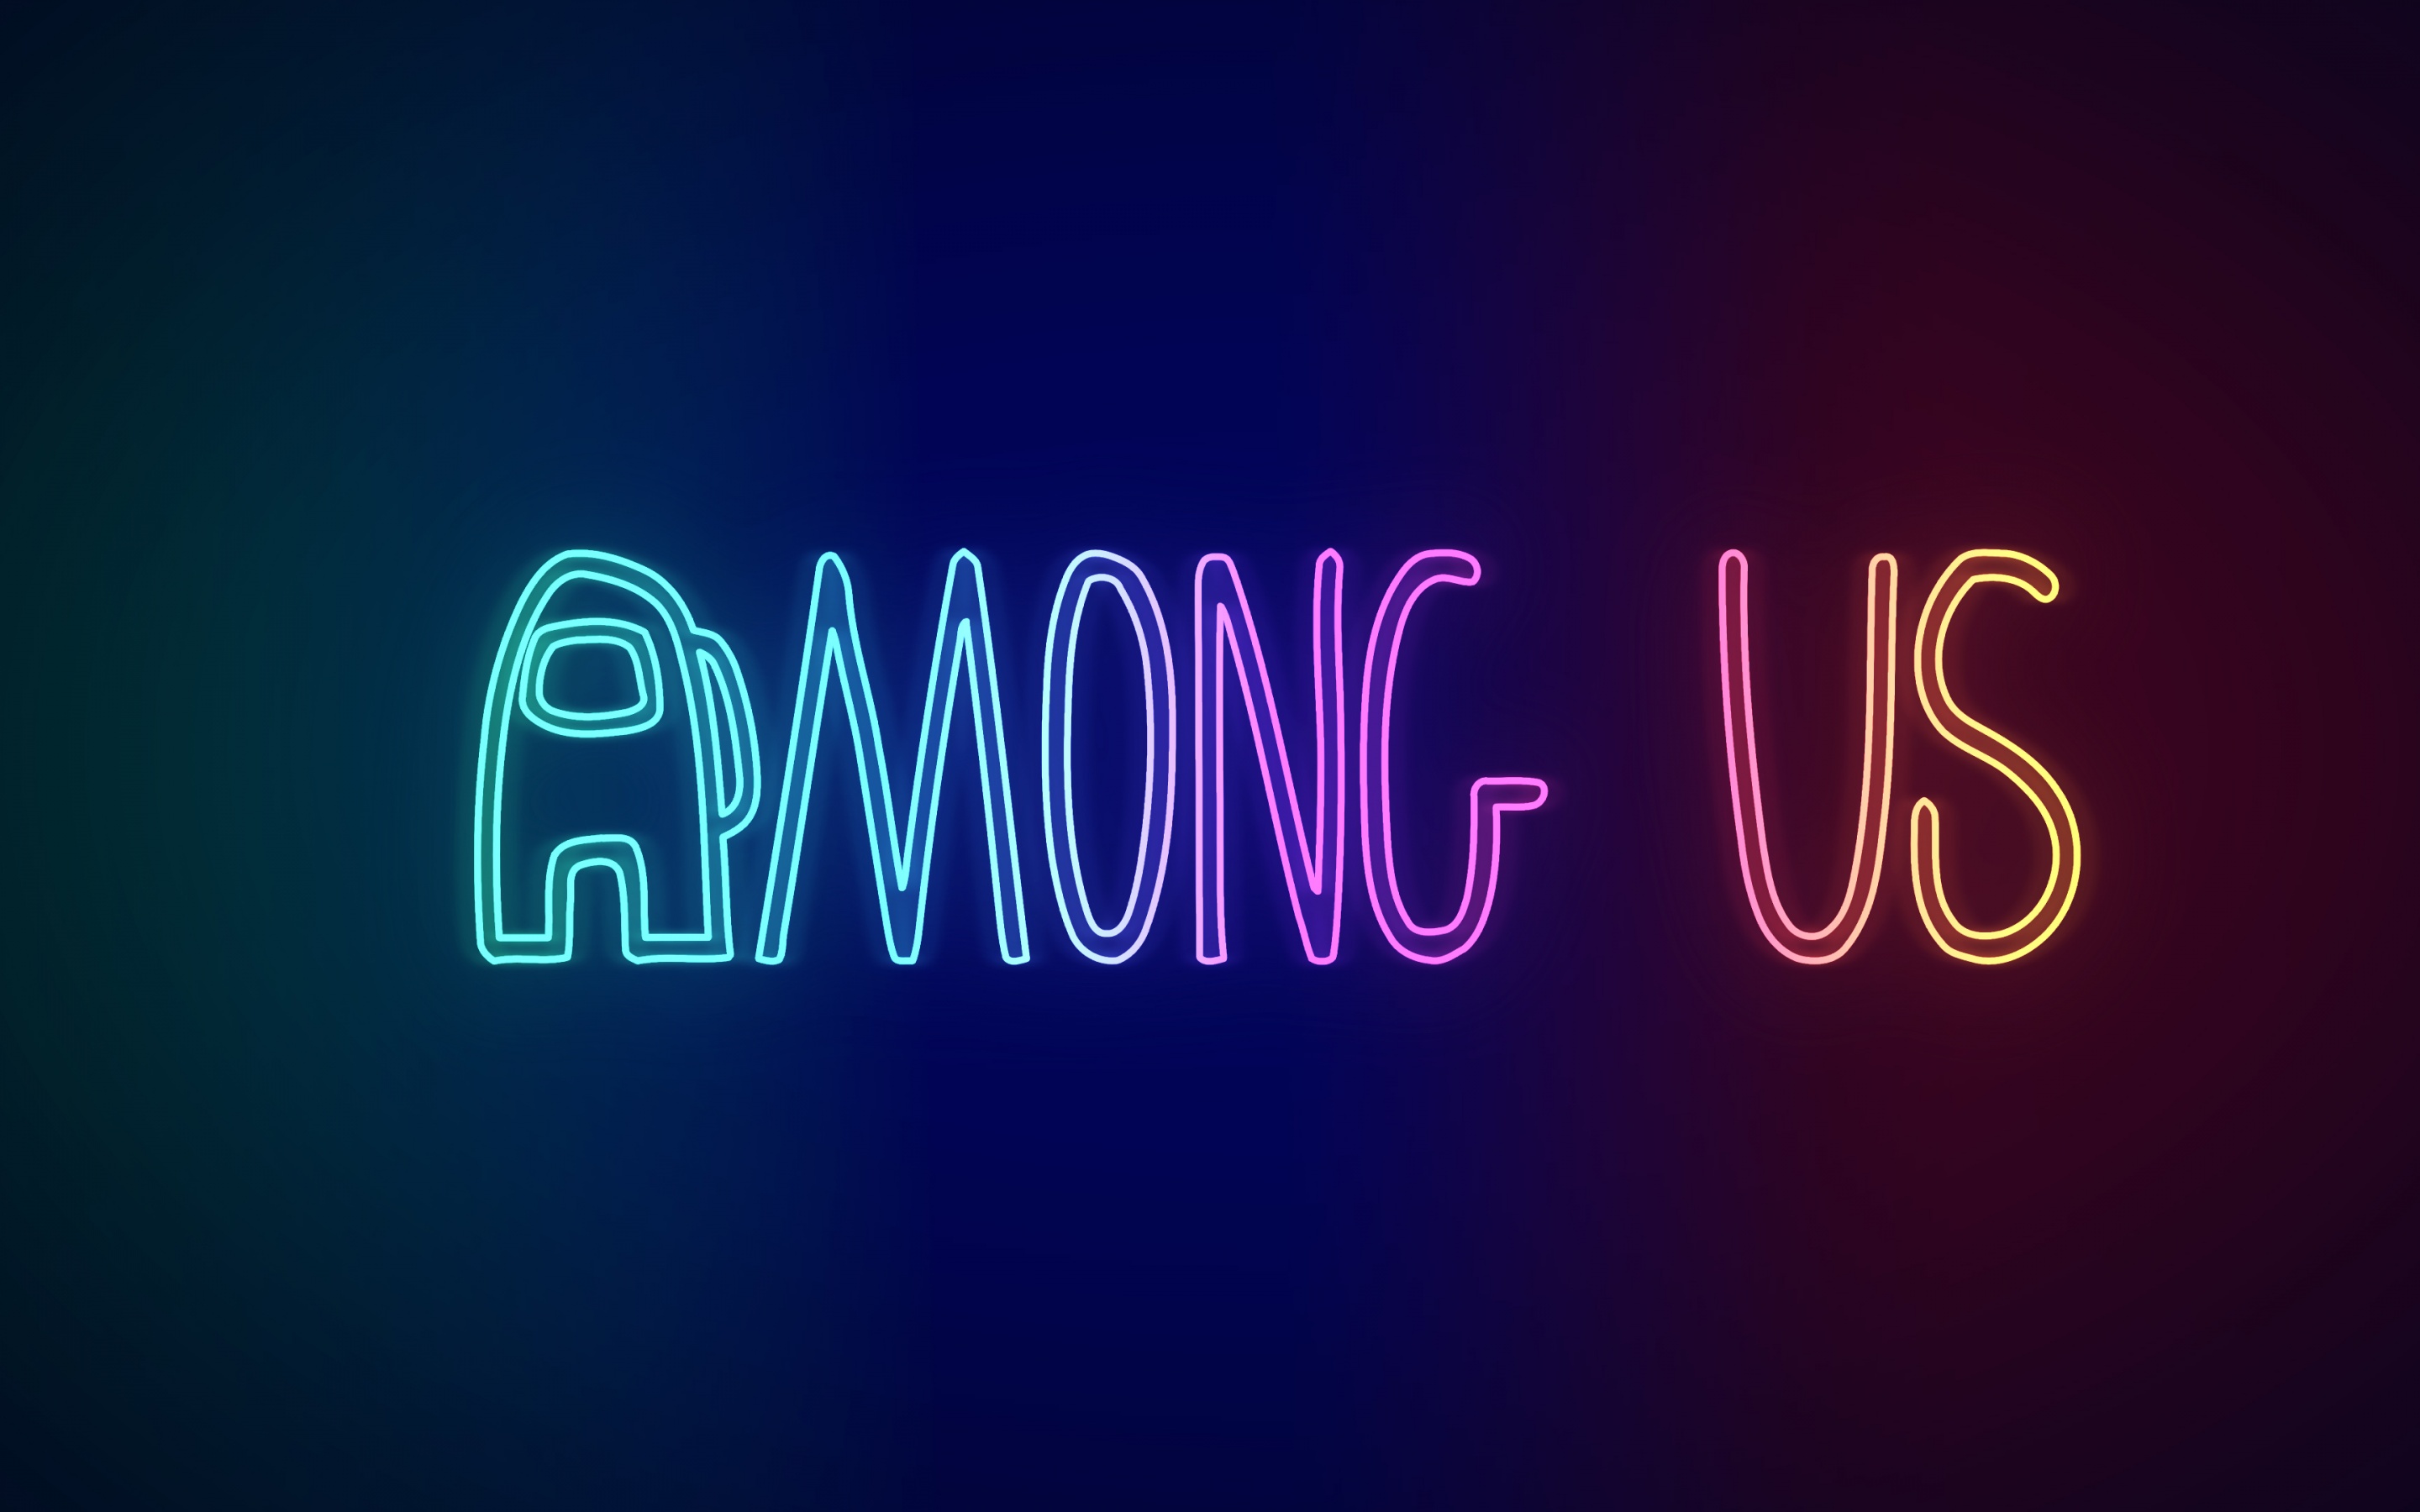 Among Us 4k Wallpaper Neon Ios Games Android Games Pc Games Gradient Background Games 3954